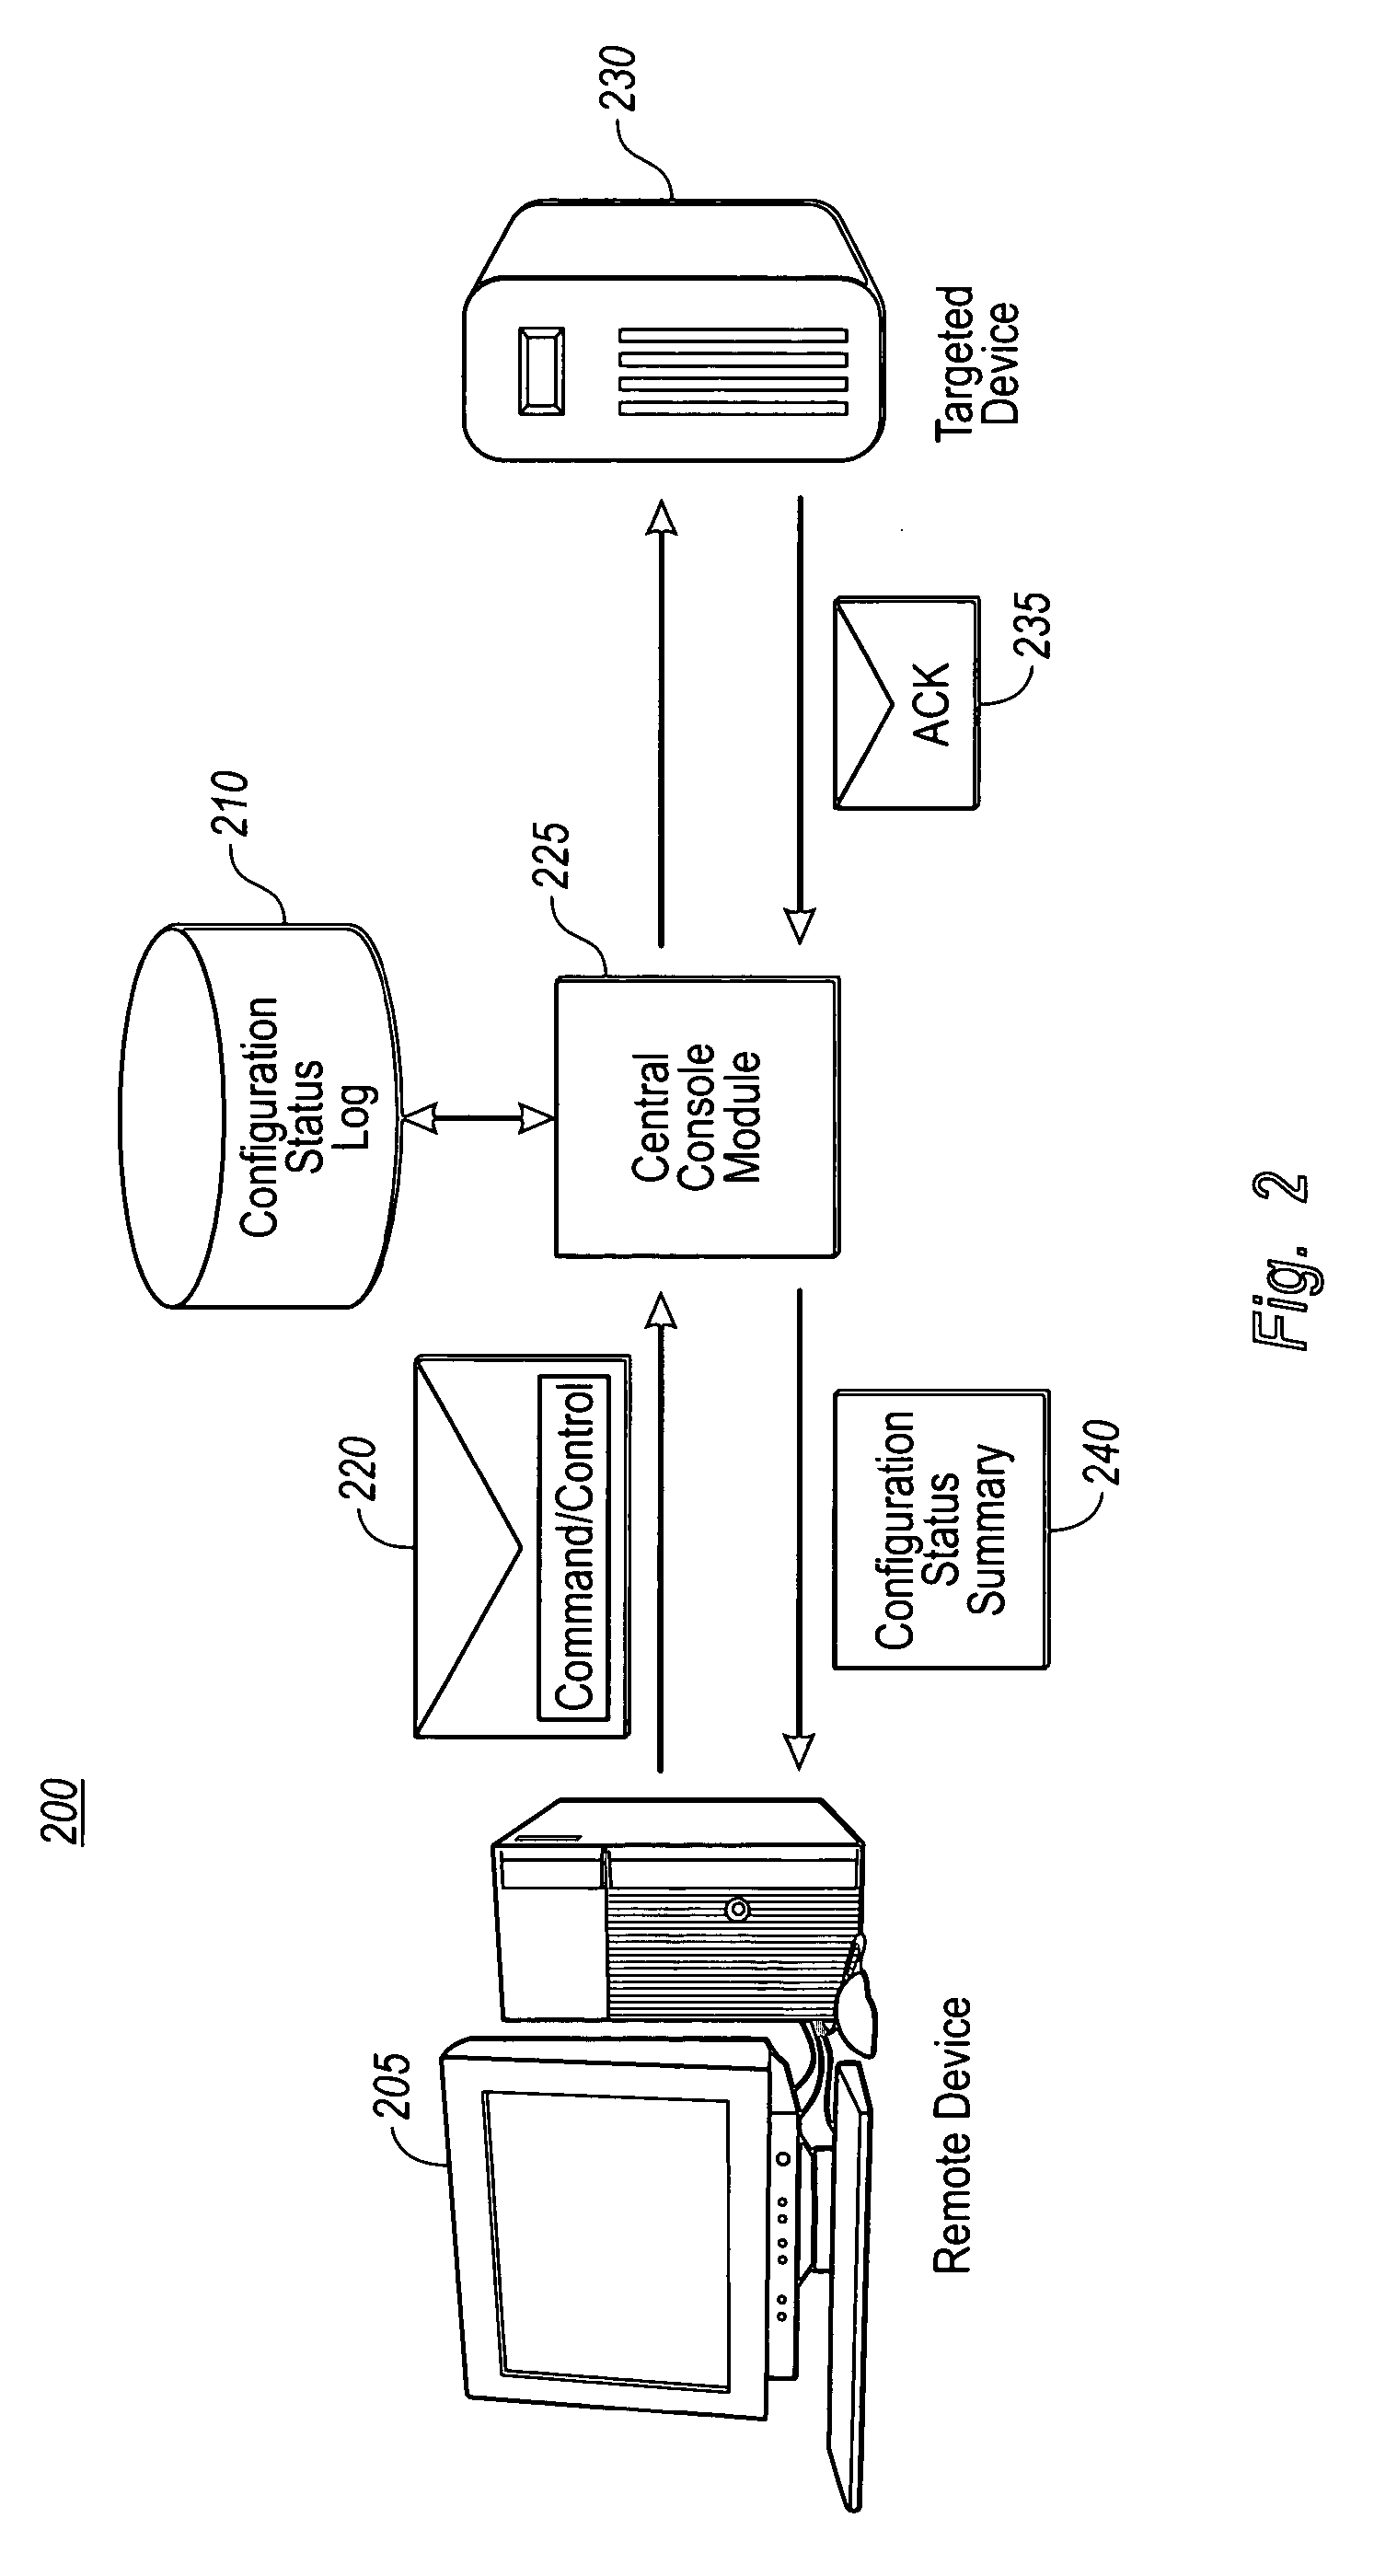 Secure remote configuration of targeted devices using a standard message transport protocol